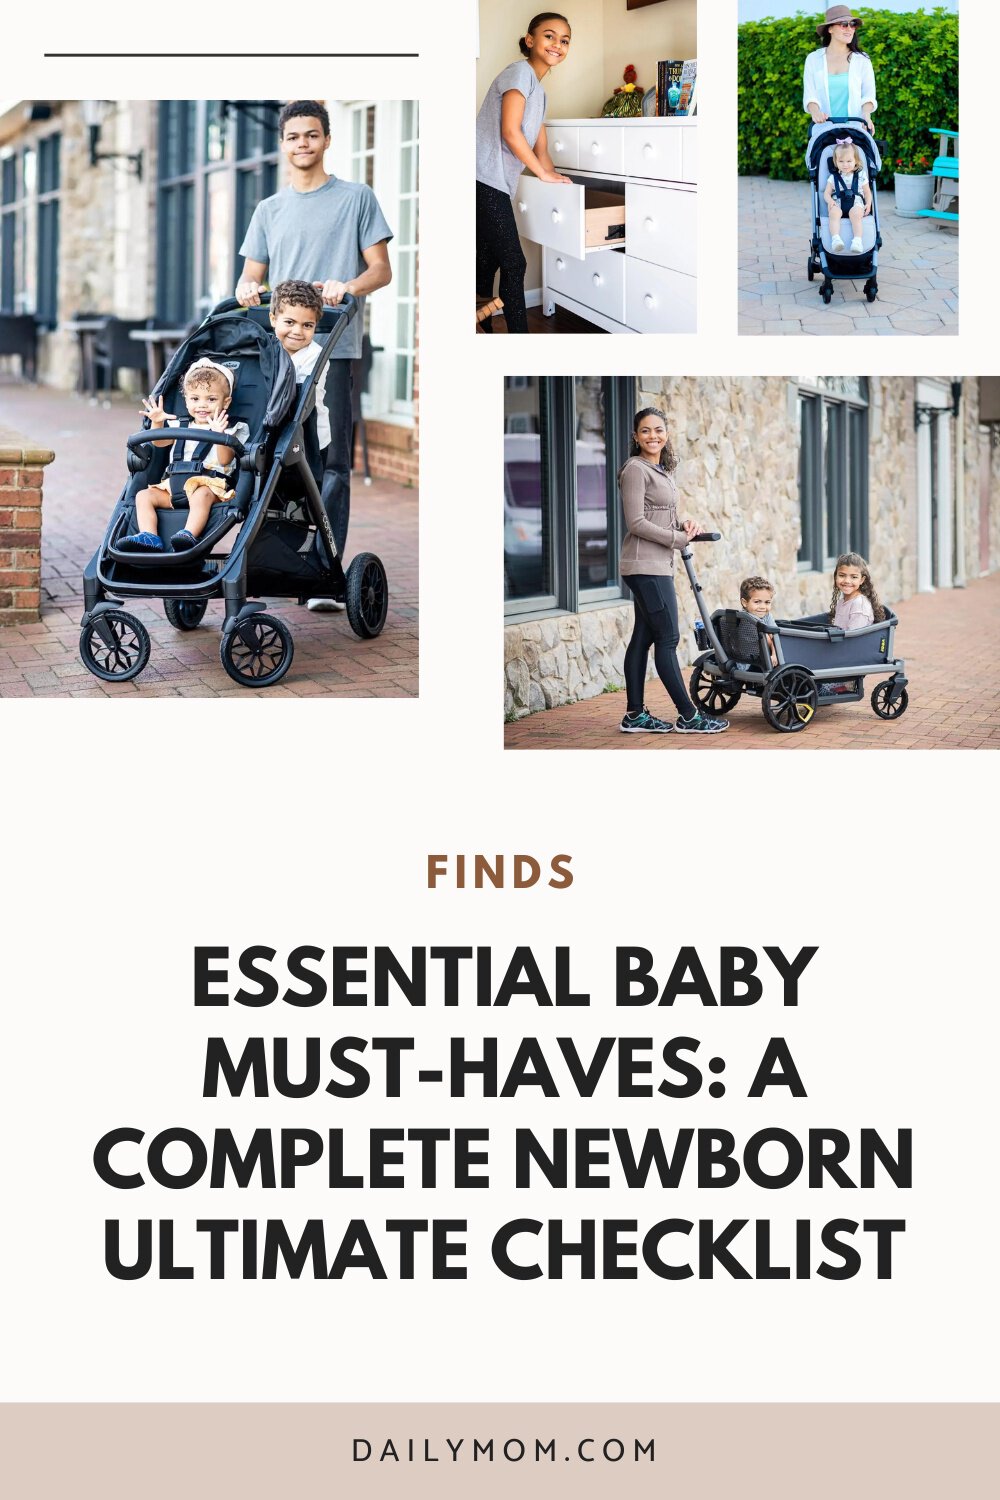 Essential Baby Must-Haves: A Complete Newborn Ultimate Checklist  126 Daily Mom, Magazine For Families